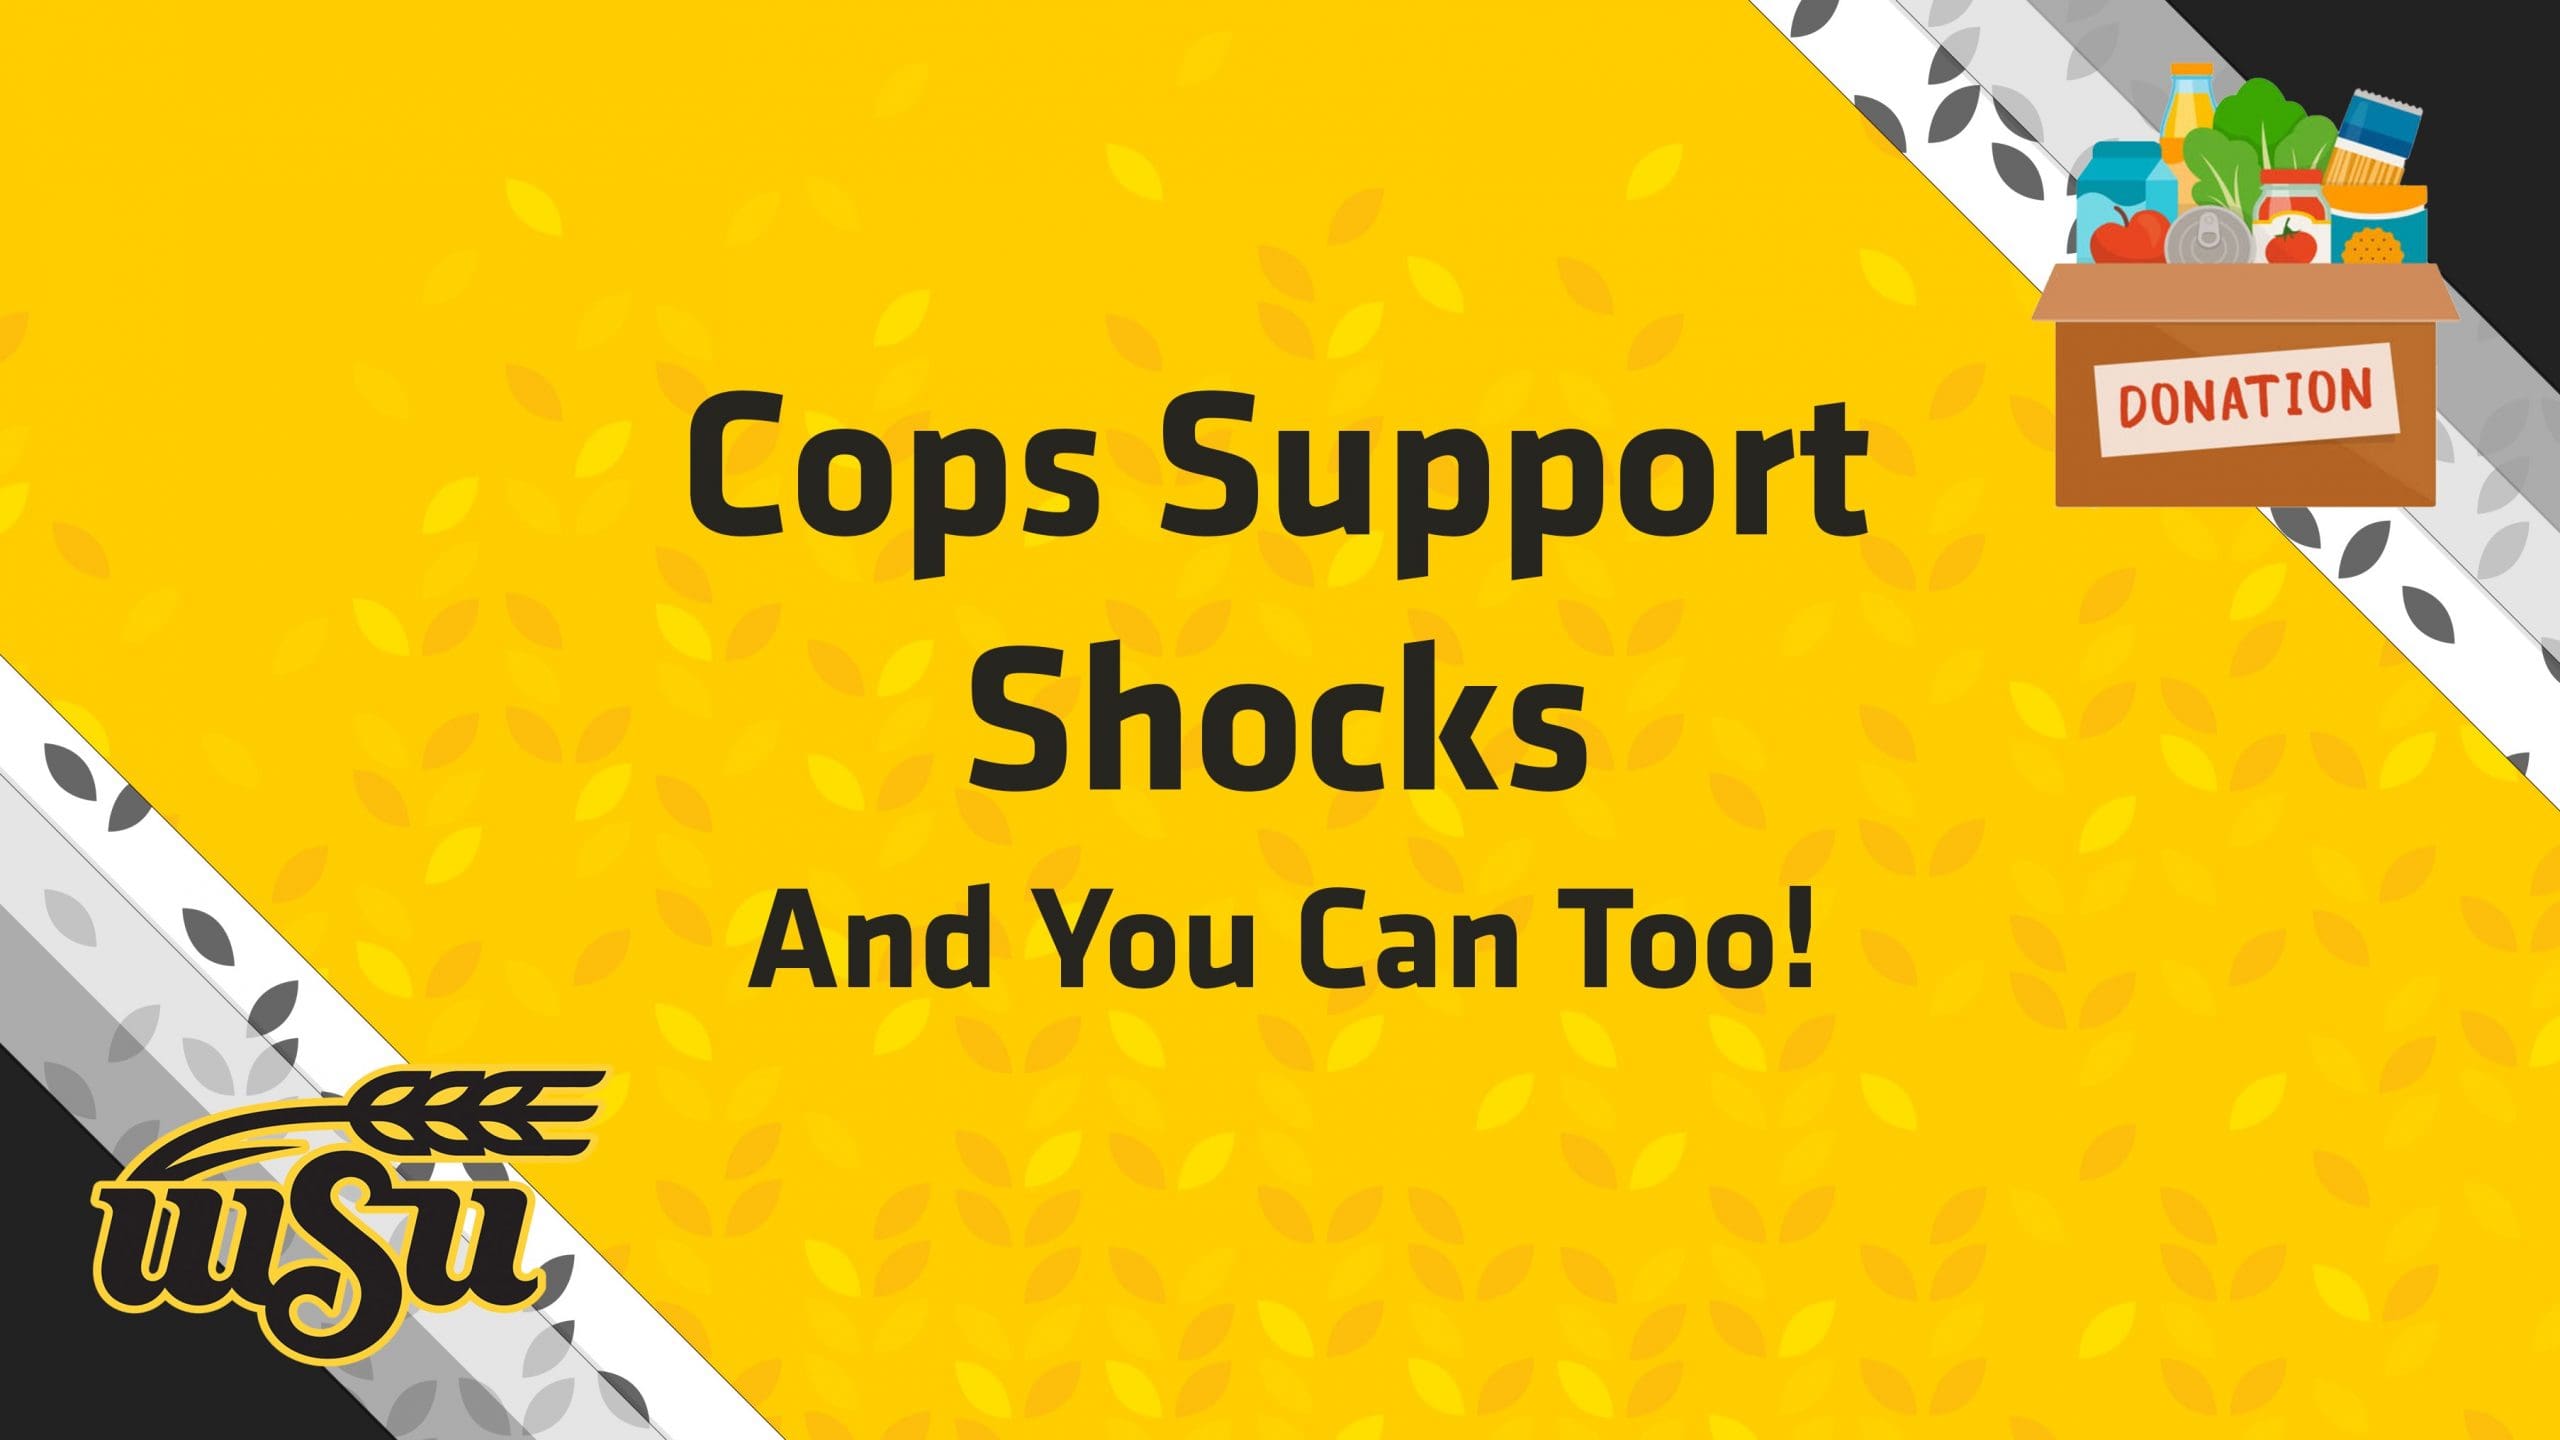 Cops support shocks and you can too!